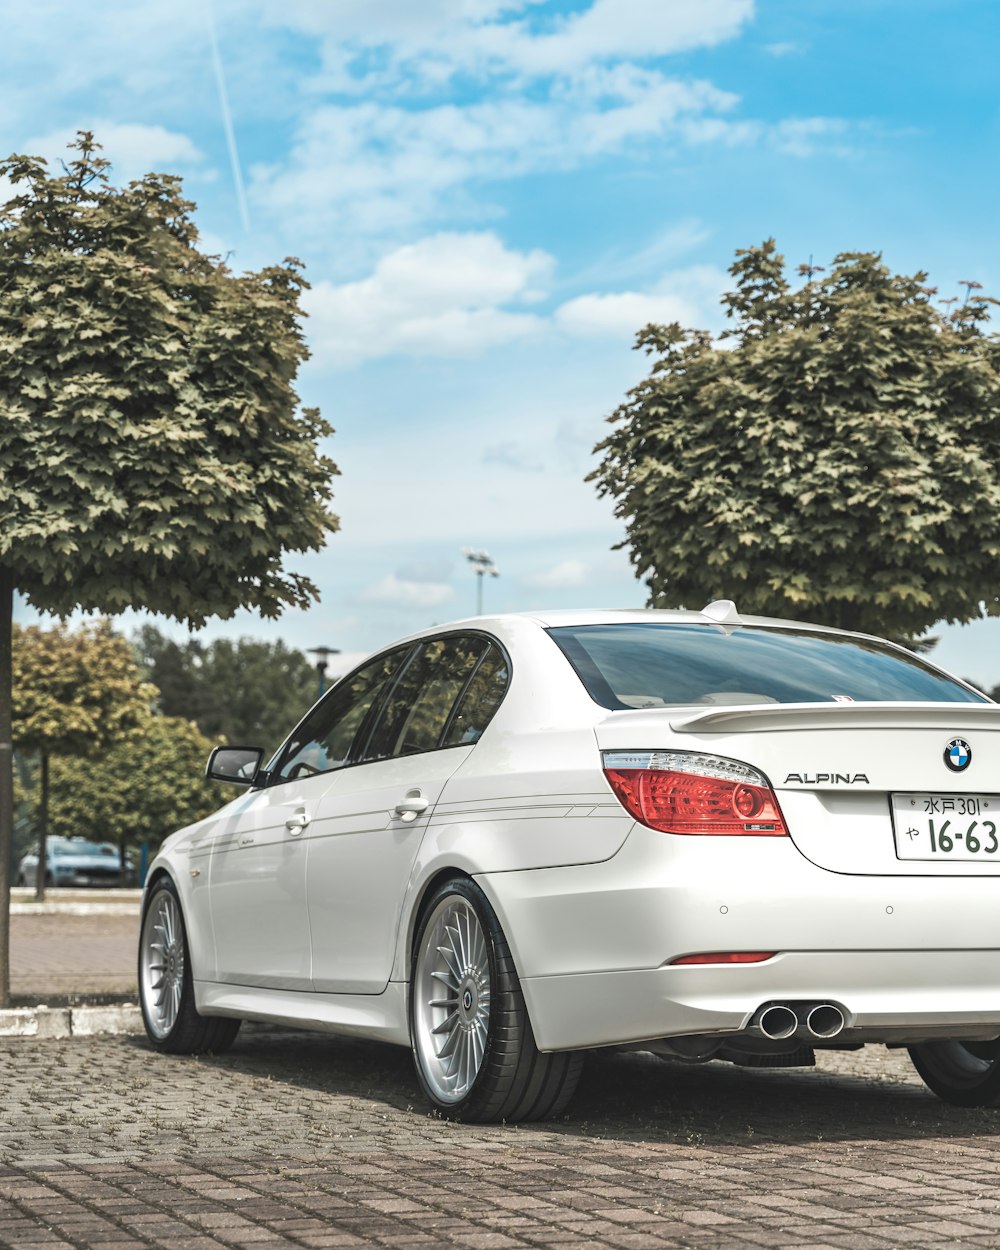 Bmw E60 On The Road Gray Bmw Car Stock Photo - Download Image Now